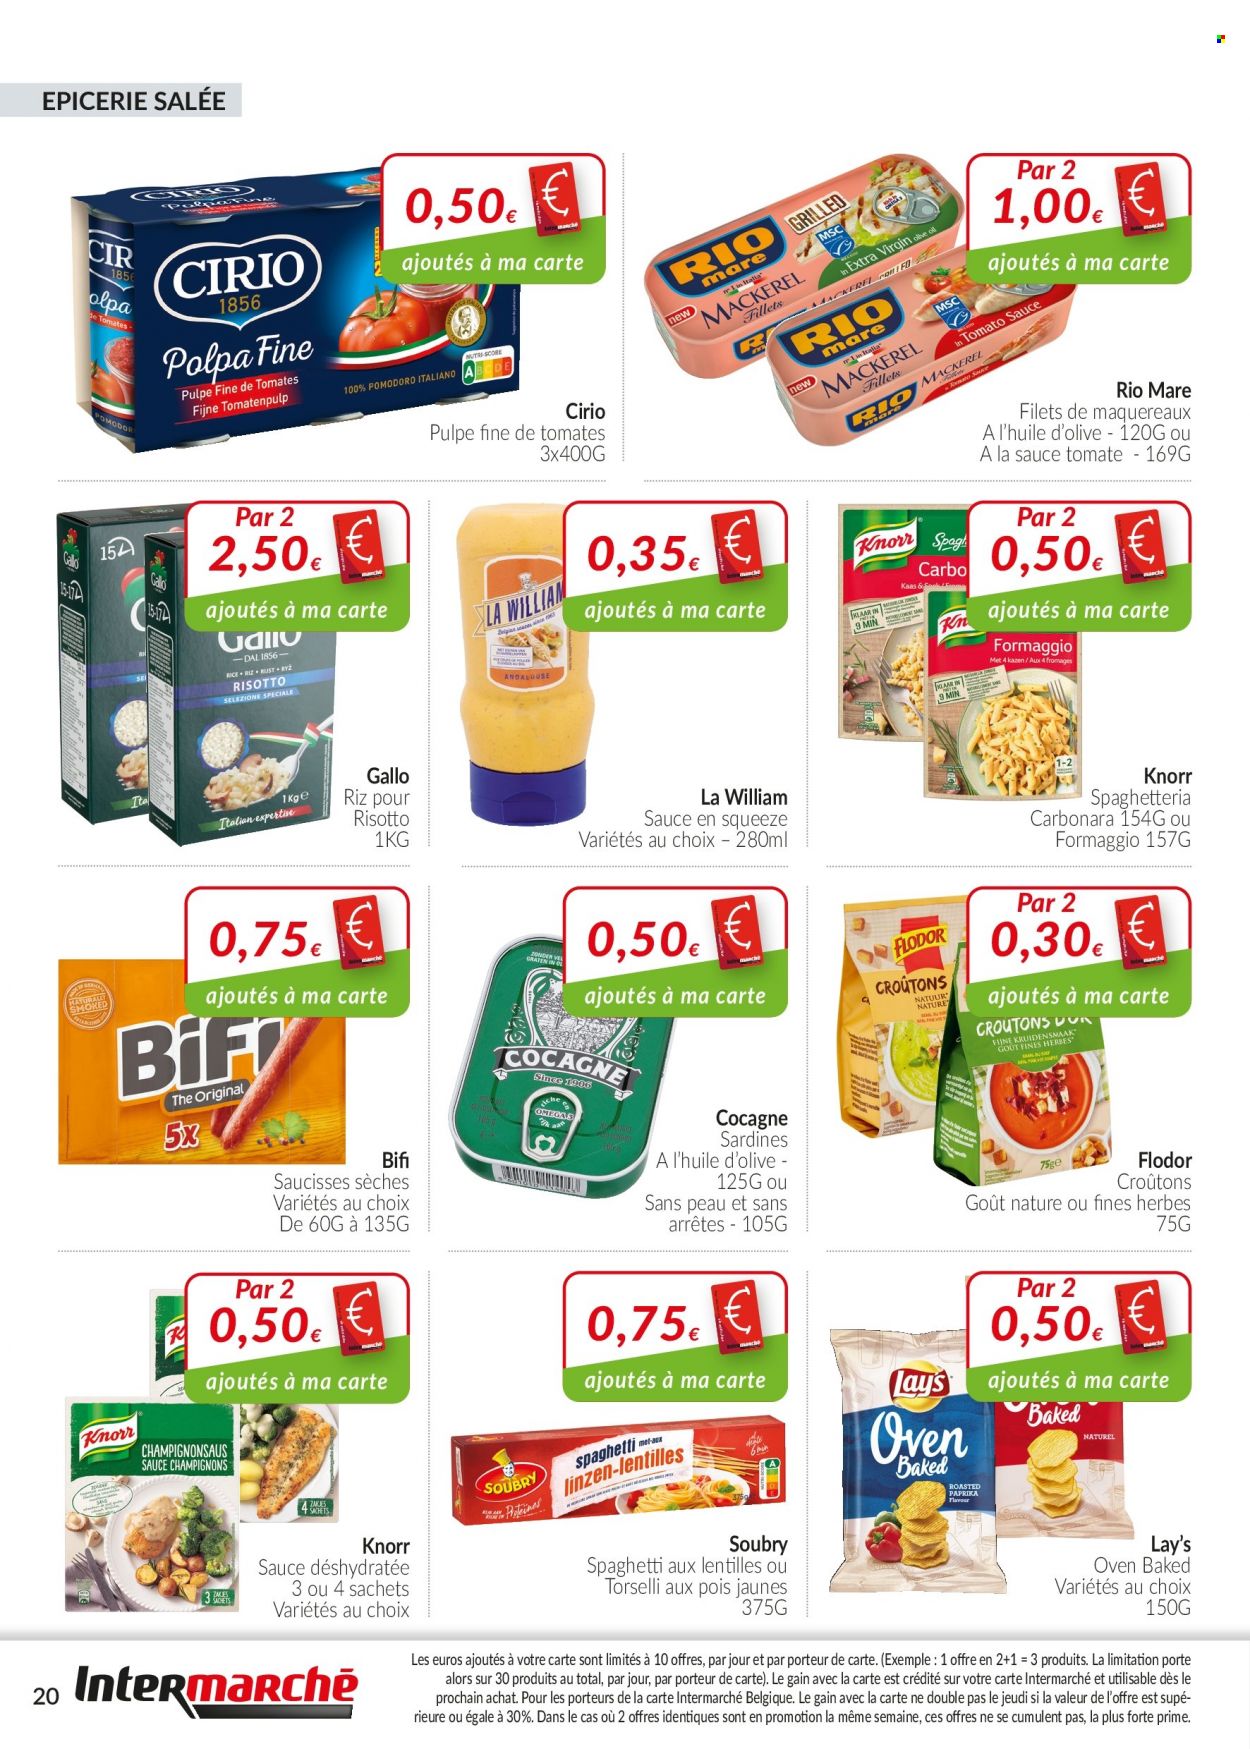 thumbnail - Intermarché-aanbieding - 01/01/2022 - 31/01/2022 -  producten in de aanbieding - Rio Mare, Knorr, risotto, croutons, spaghetti. Pagina 20.